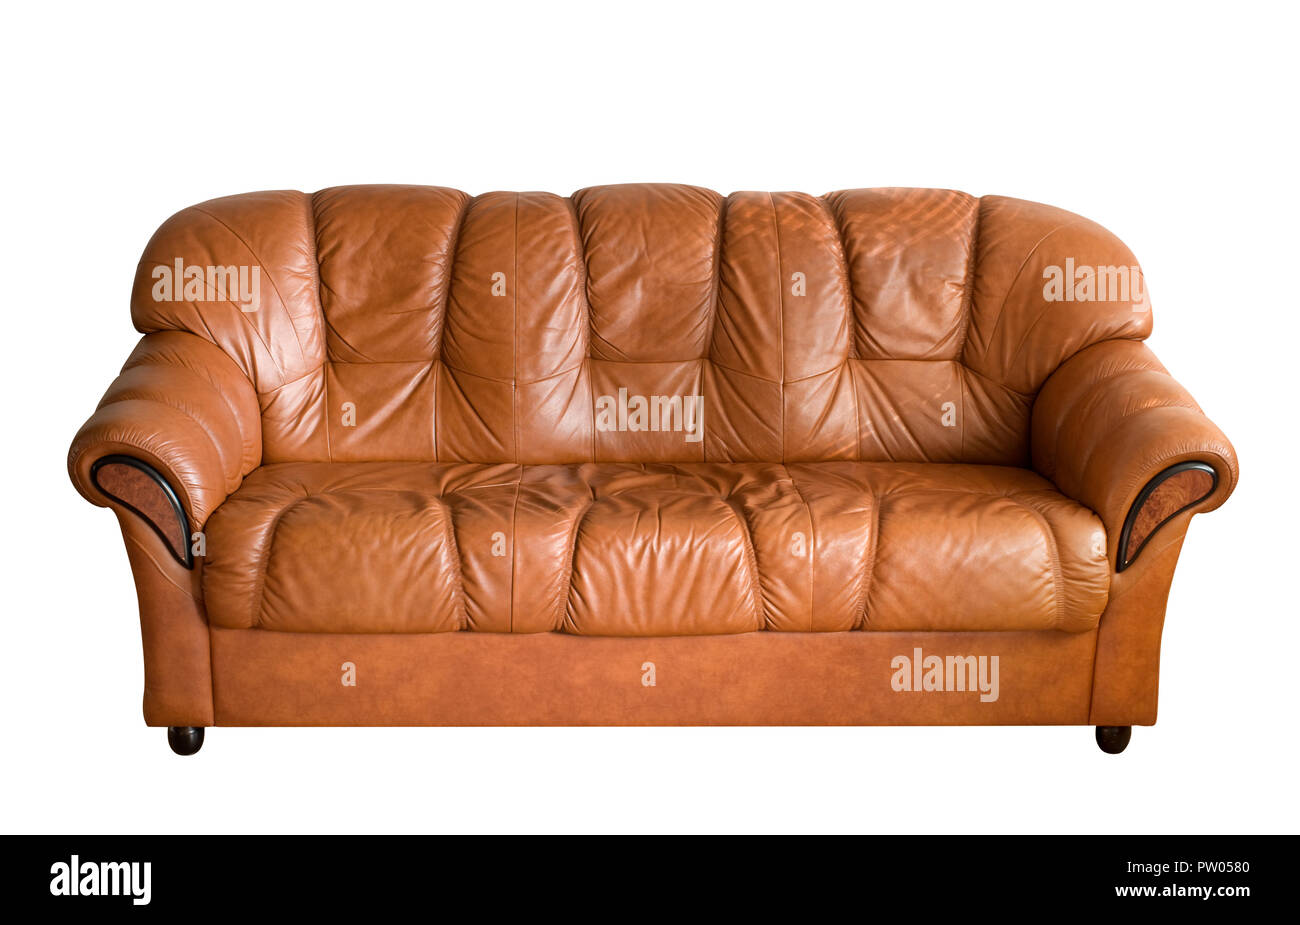 Brown leather sofa isolated on white background. Stock Photo